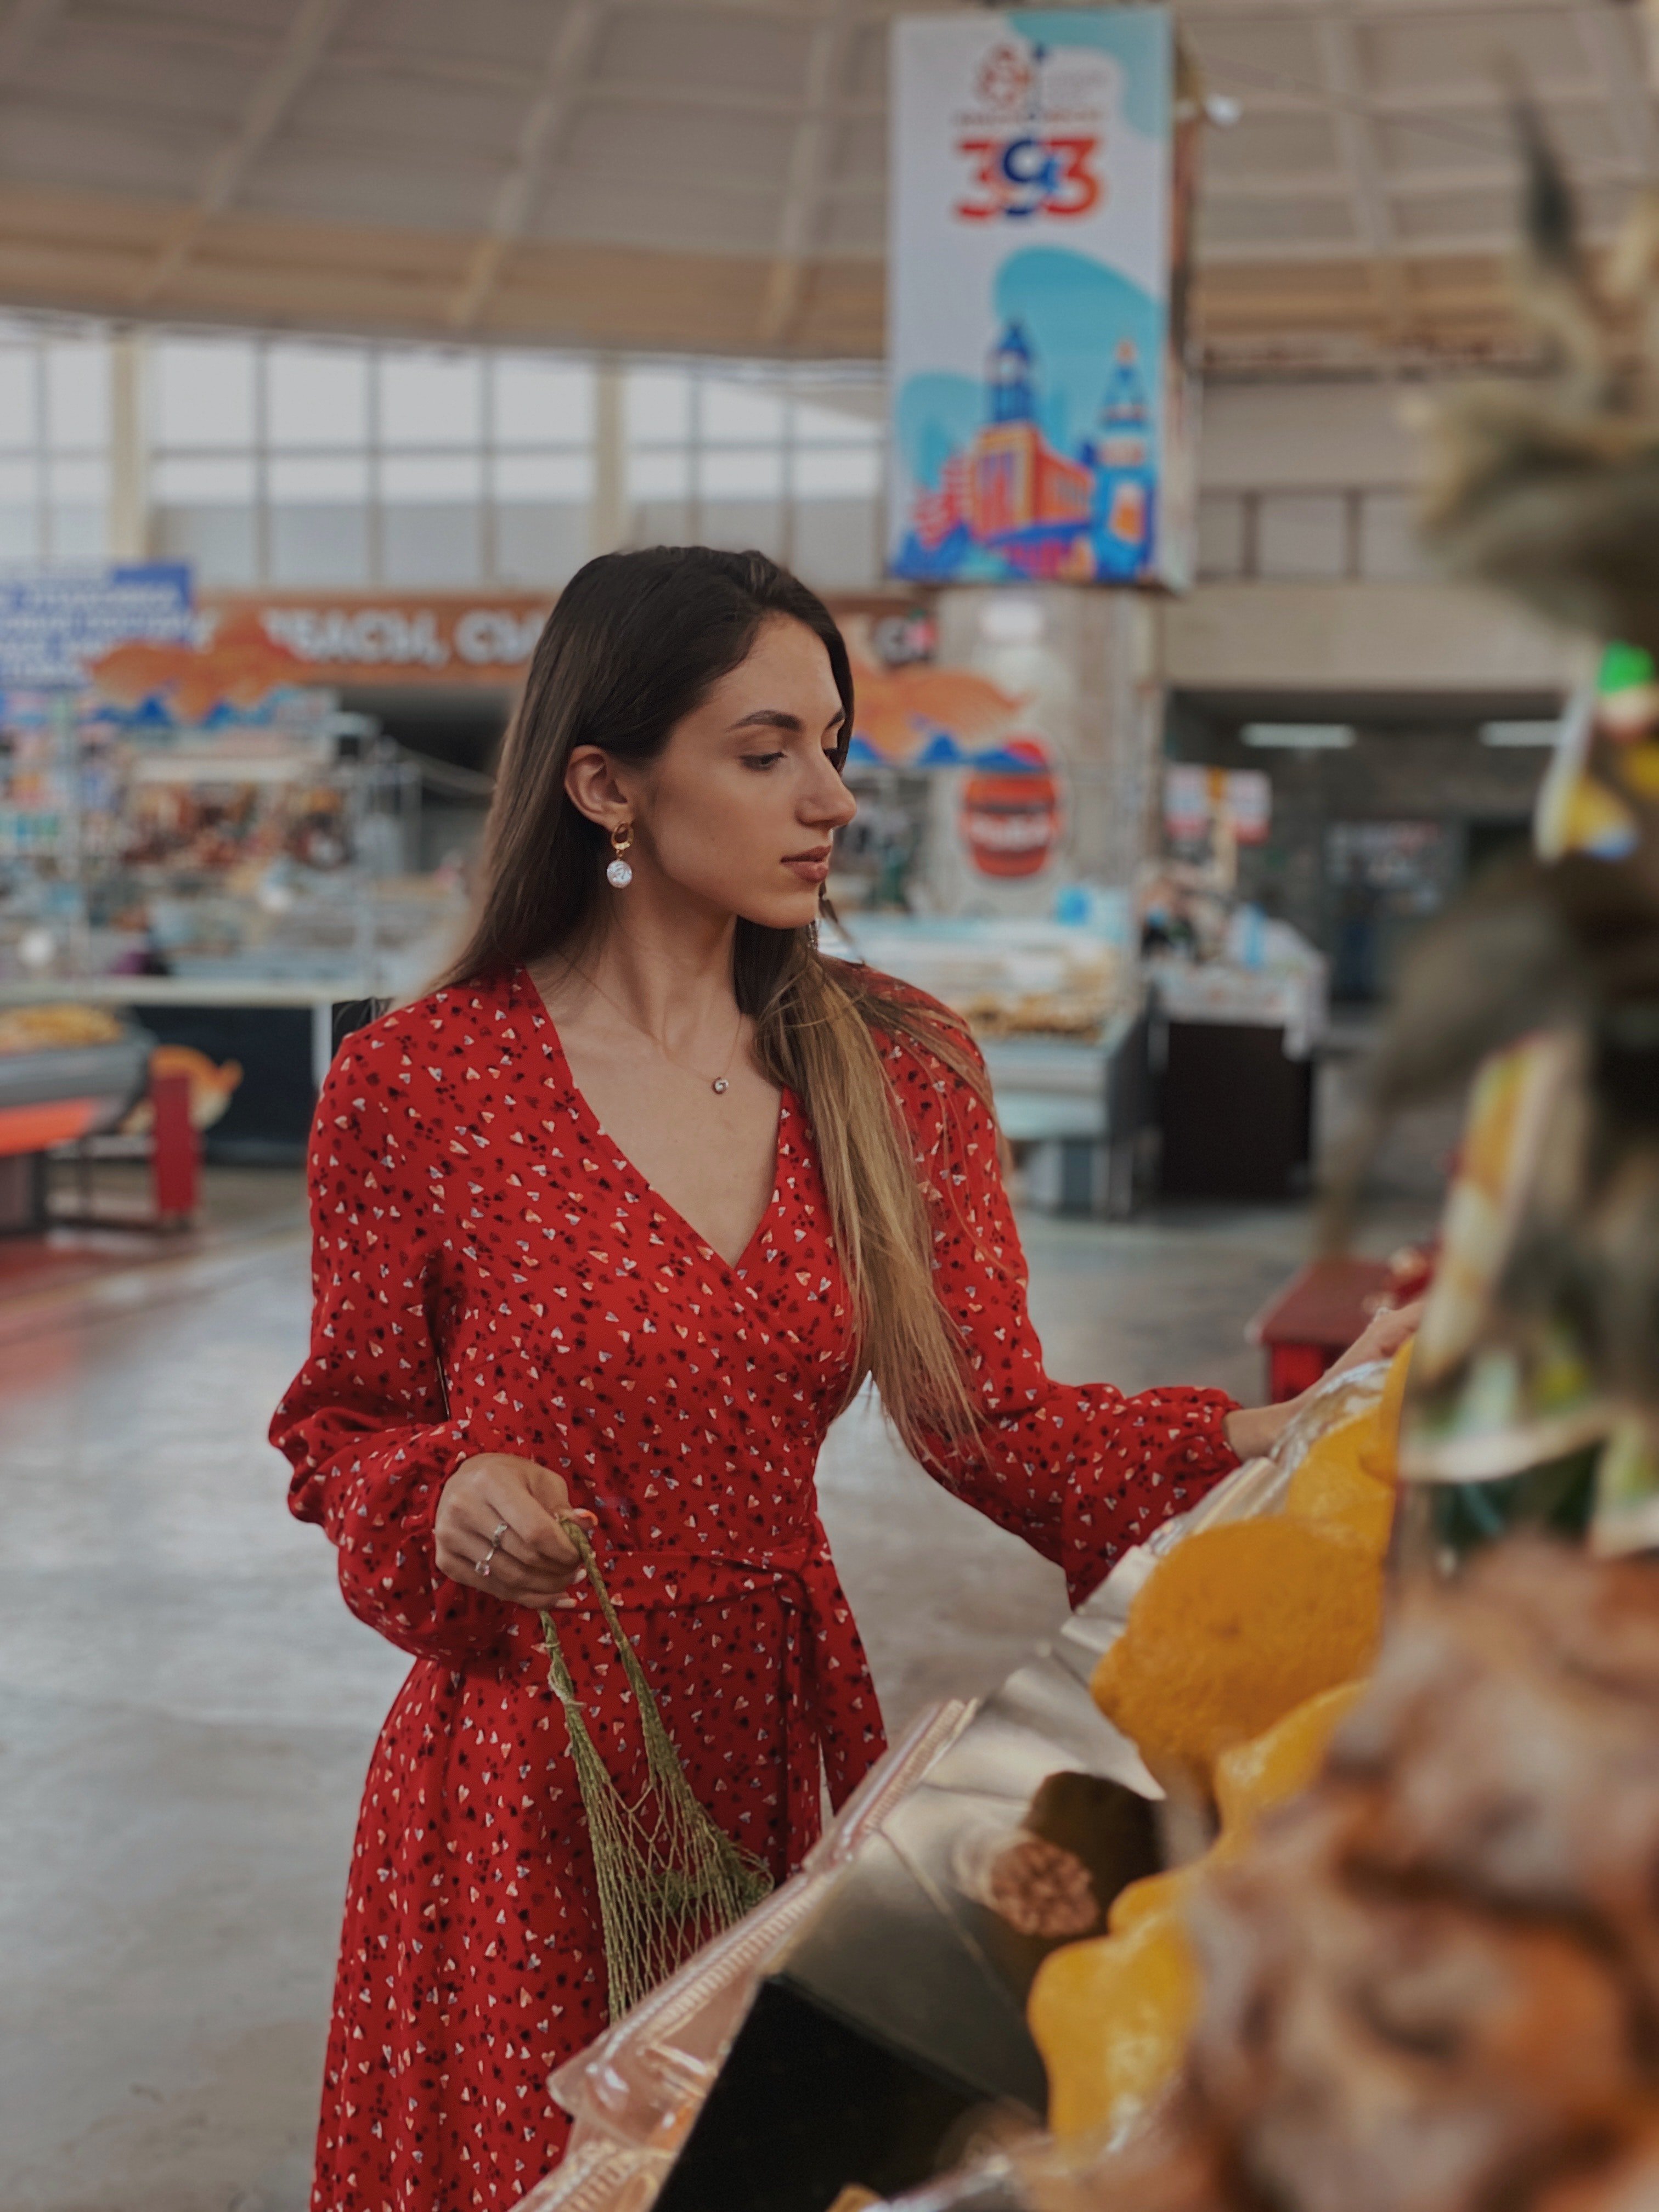 Maria grabbed some snacks at a grocery store because she was starving. | Source: Pexels